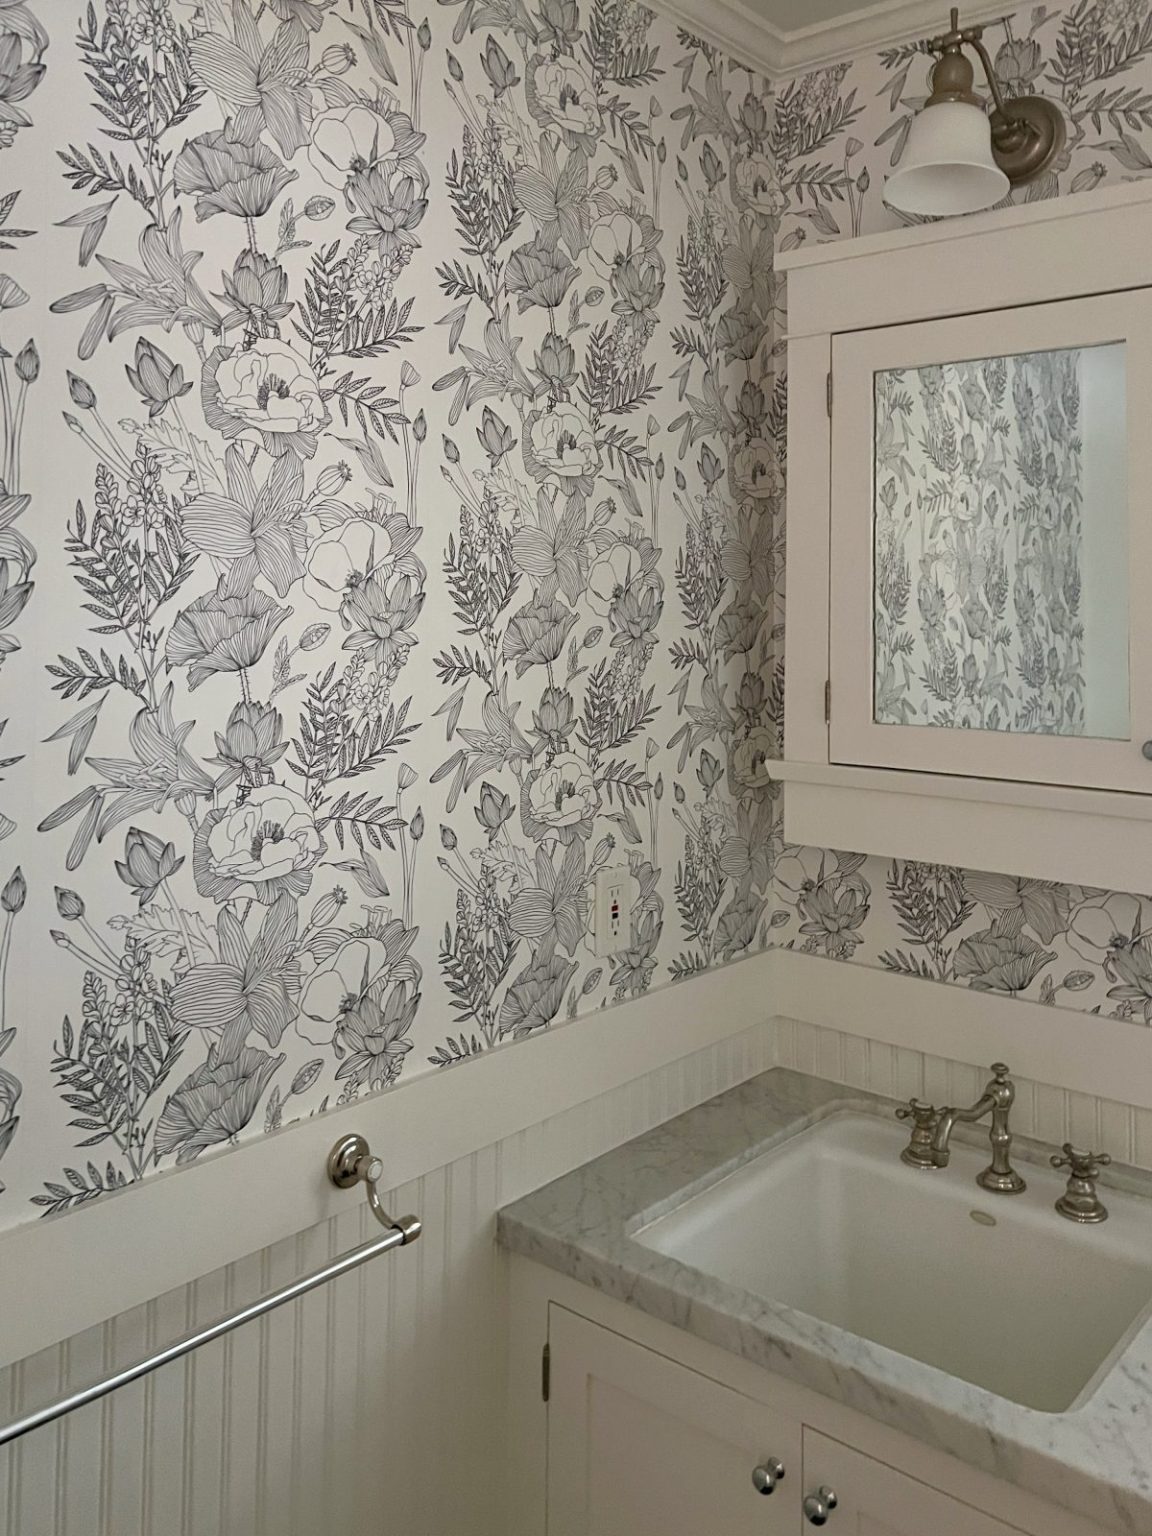 One Day Bathroom Remodel with Black and White Wallpaper - MY 100 YEAR ...